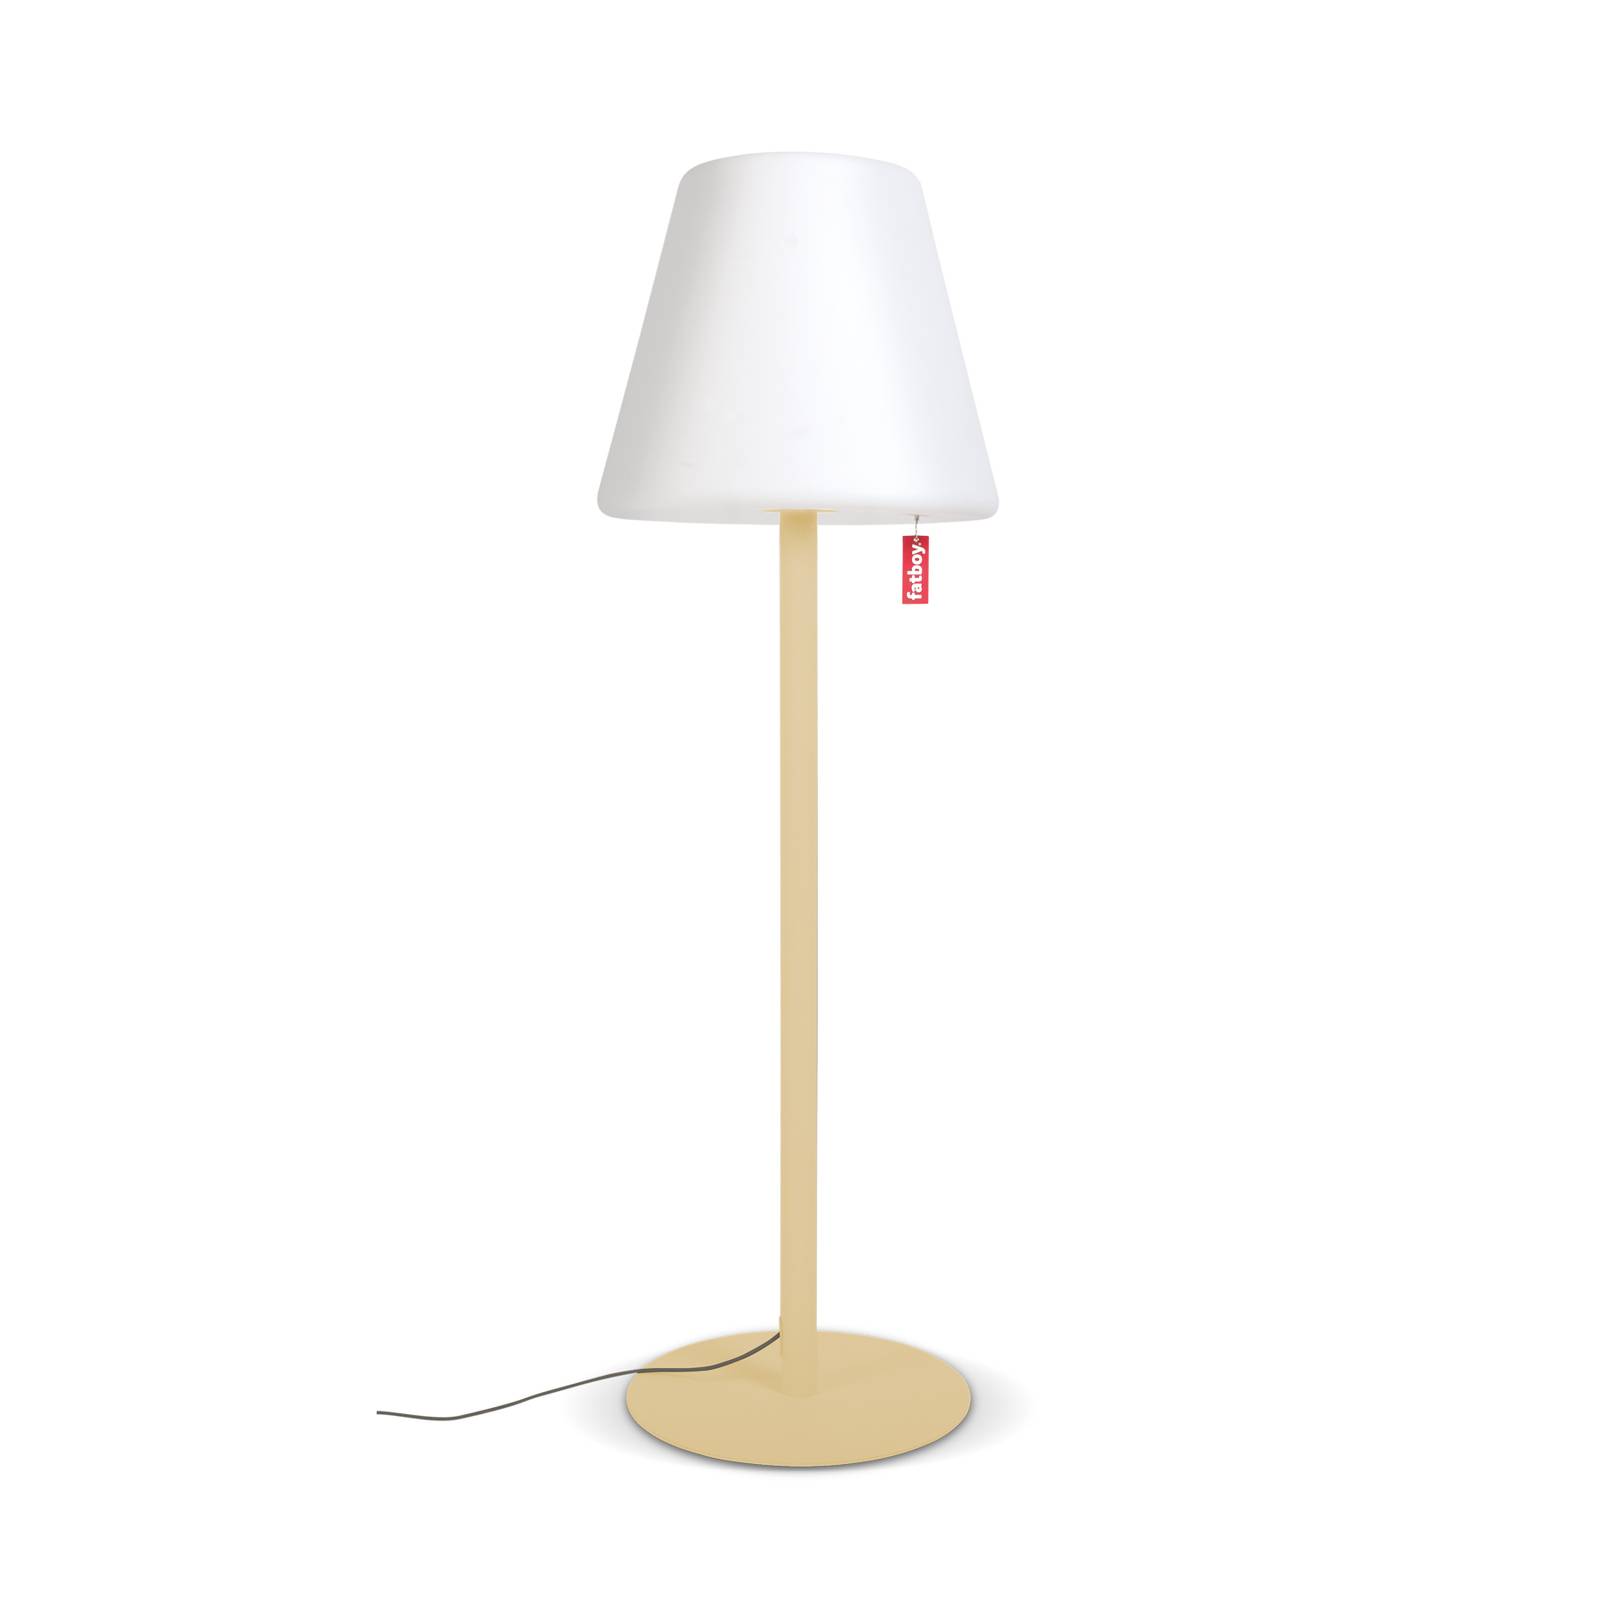 Image of Fatboy Edison the Giant lampadaire LED beige sable 8719773043030